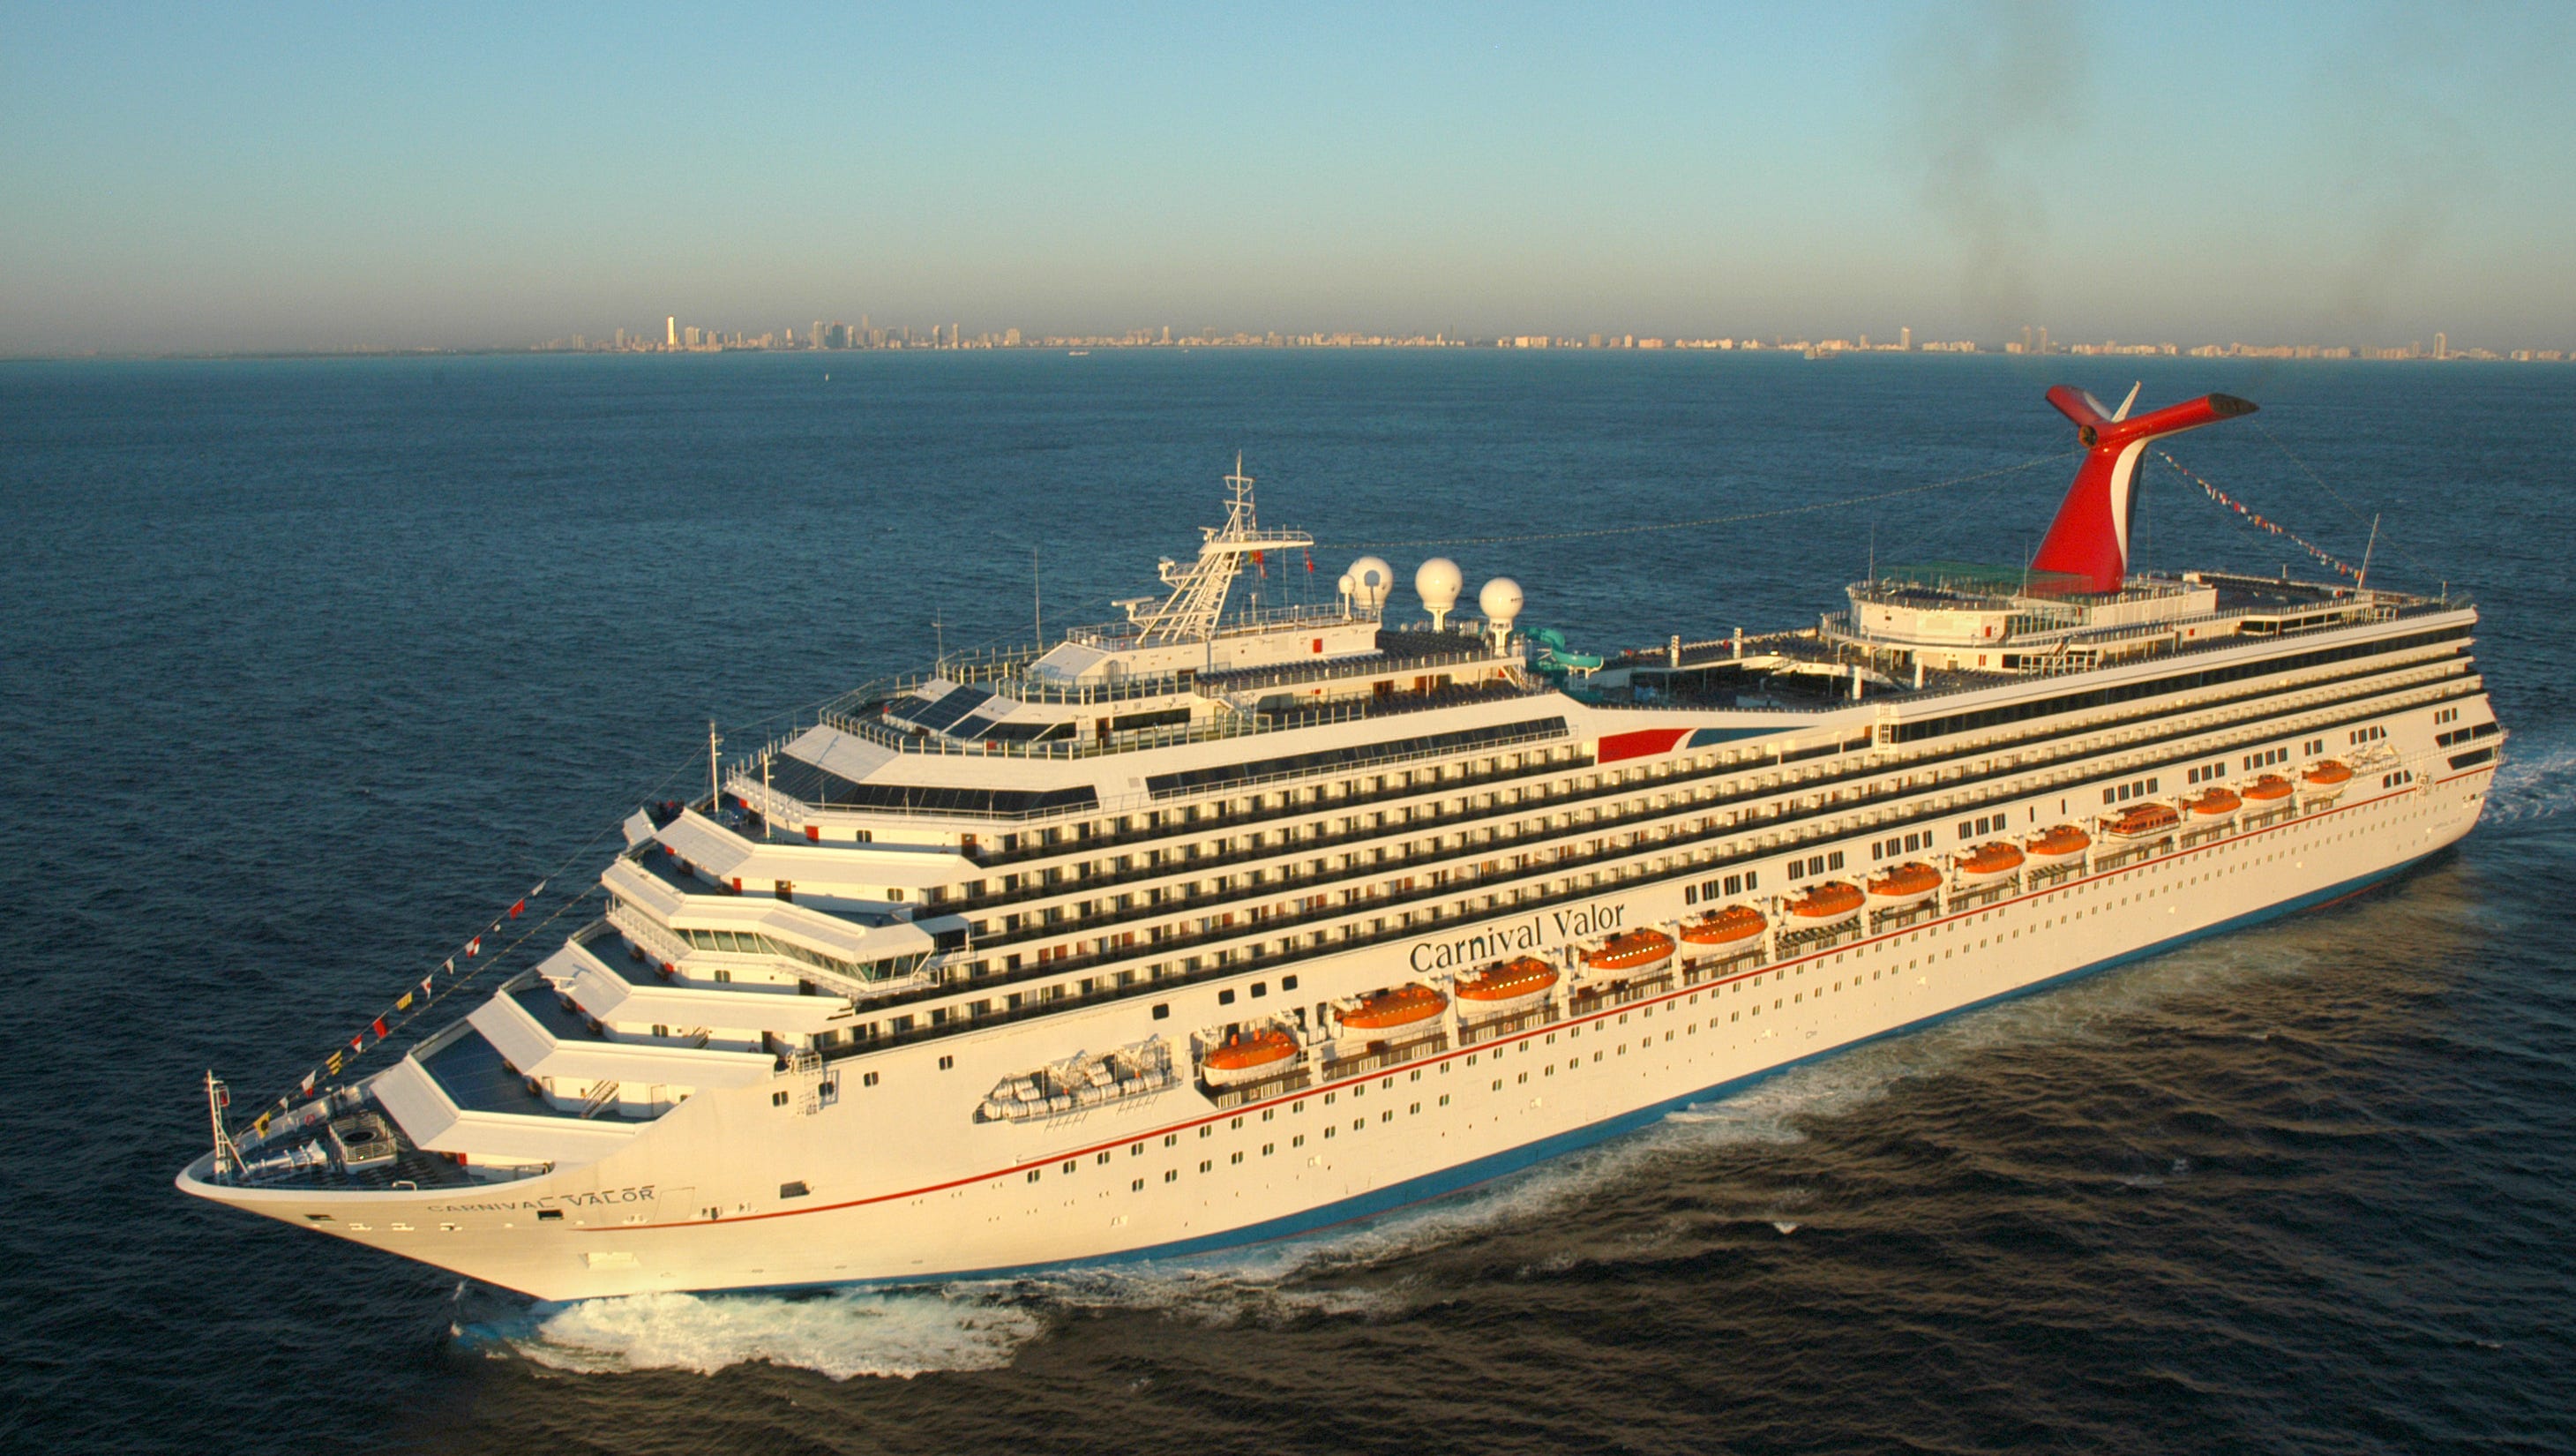 Carnival Valor Passenger fell on cruise ship, has serious injuries